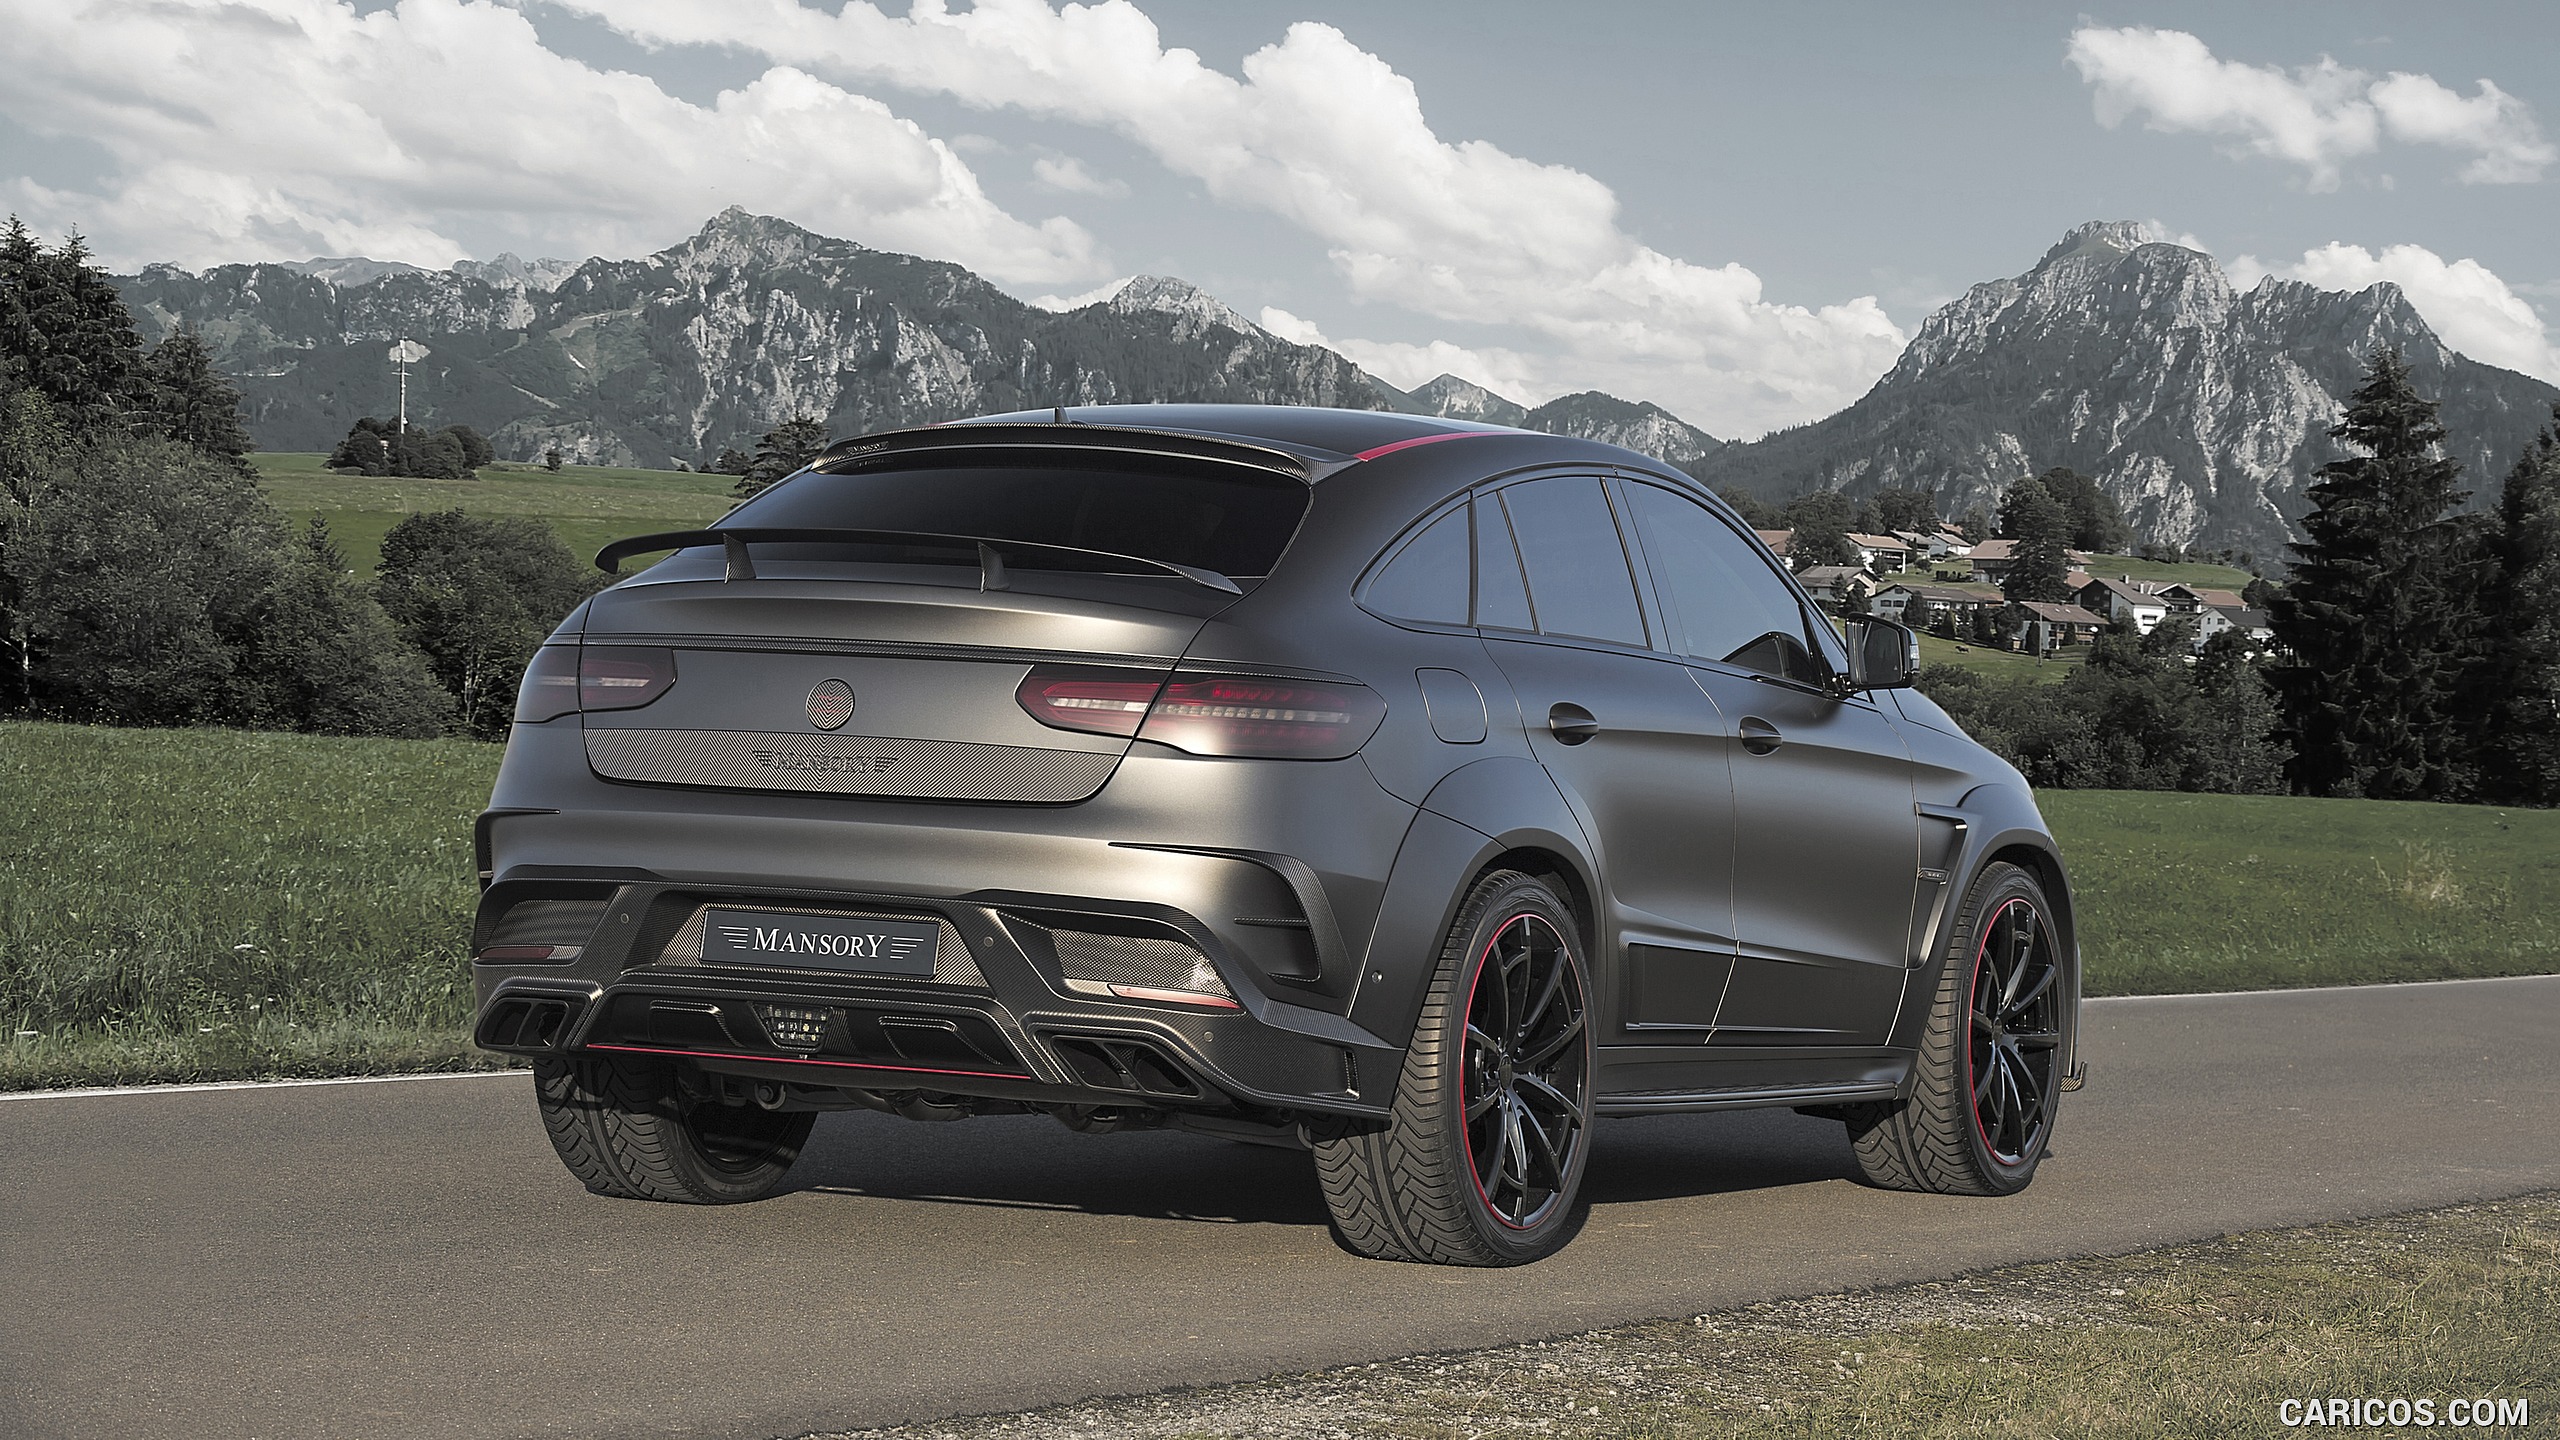 2016 MANSORY Mercedes-AMG GLE 63 Coupe - Rear, #2 of 8